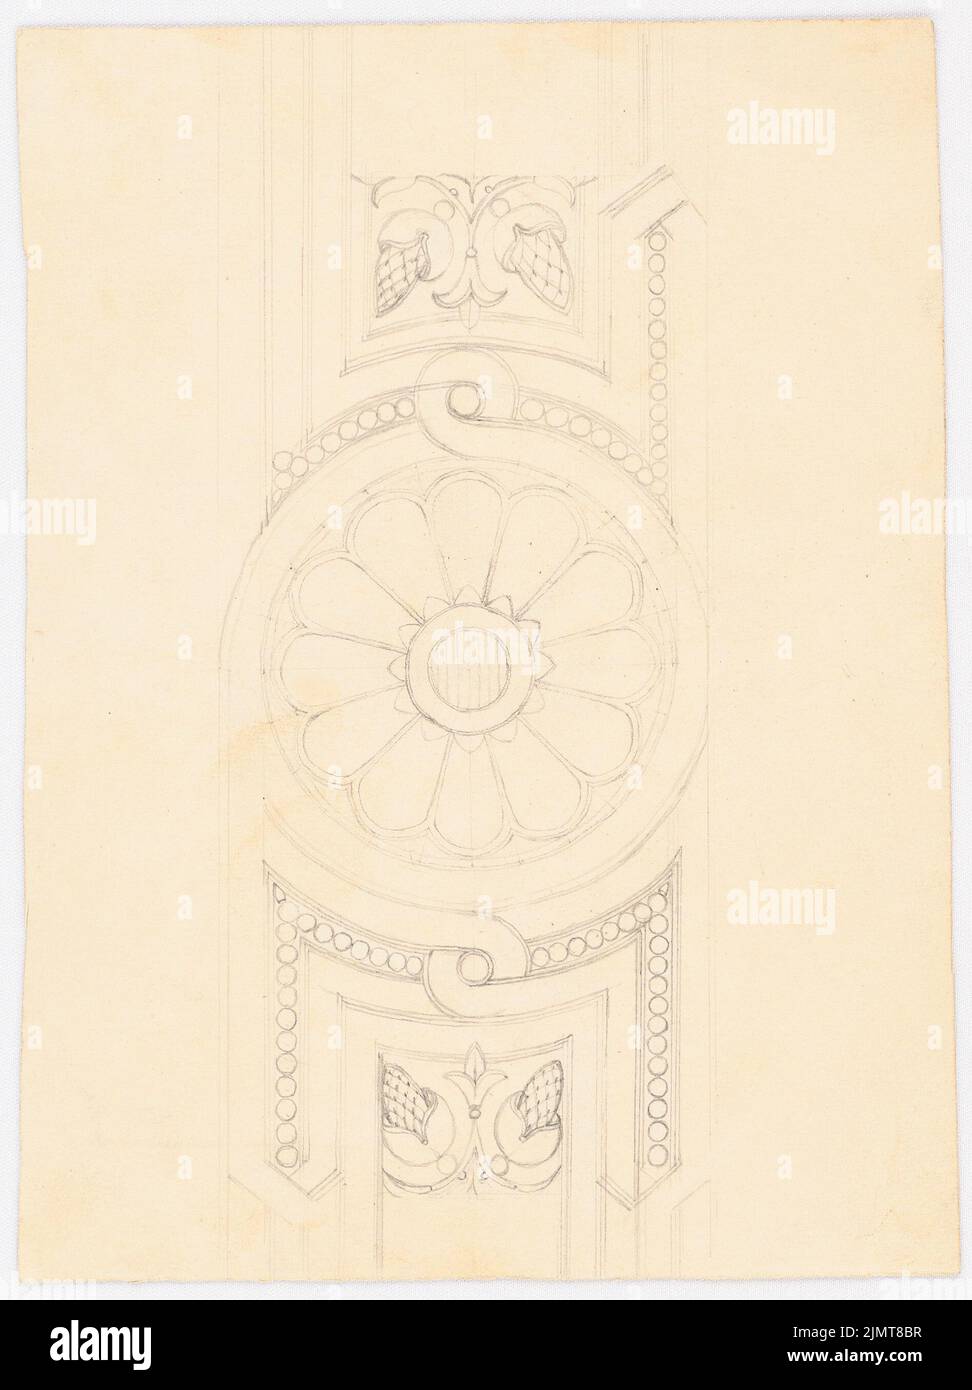 Diebitsch Carl von (1819-1869), Villa, Cairo. (?) (Without Dat.): Detailed rosette frieze framed with a braid and pearl pattern, floral pattern. Pencil on cardboard, 21.5 x 16.1 cm (including scan edges) Diebitsch Carl von  (1819-1869): Villa, Kairo (?) Stock Photo